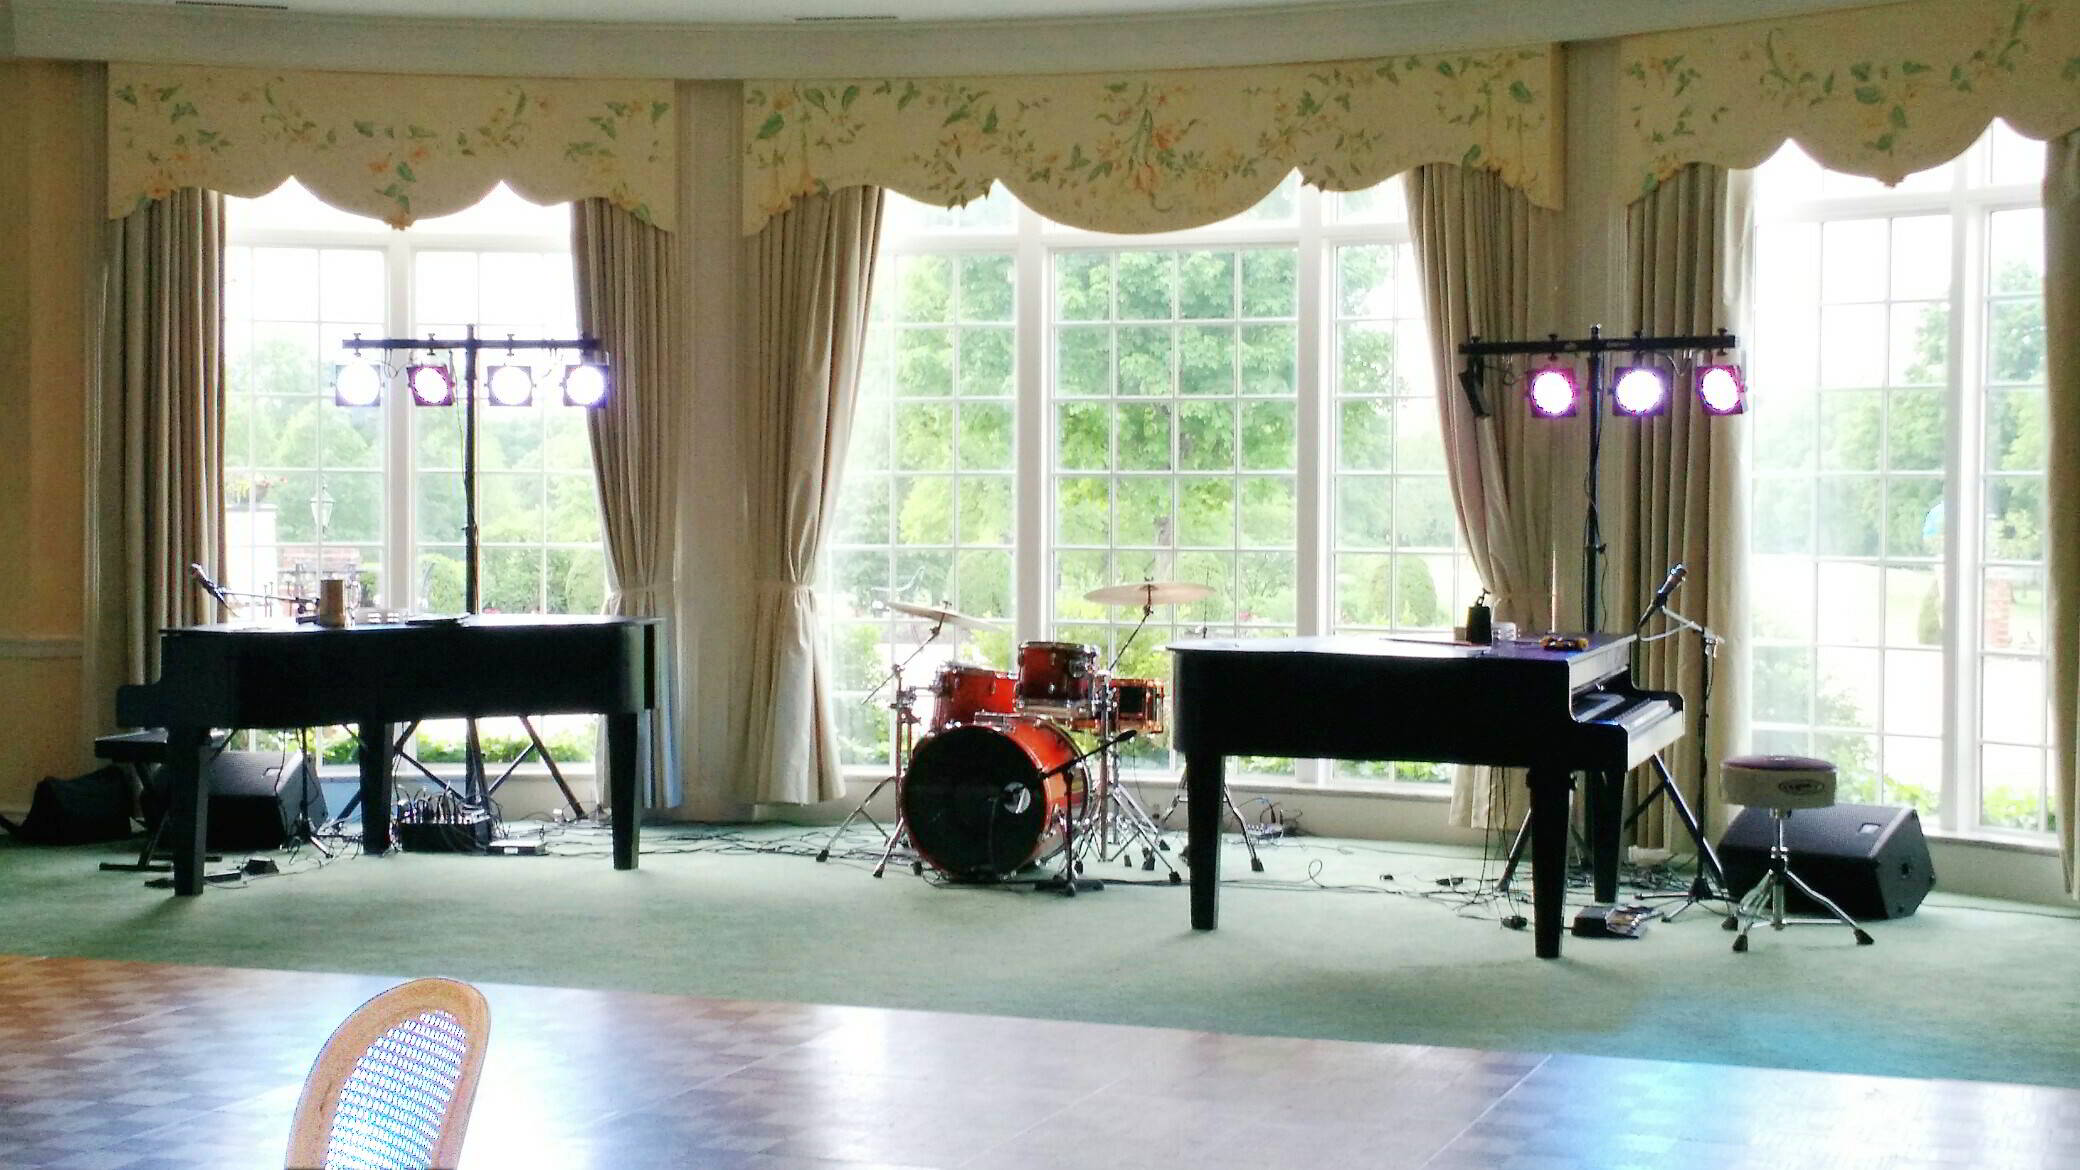 Dueling Hobbits Piano Country Club Light Chair Dueling Hobbits Piano Entertainment Music Gig Show